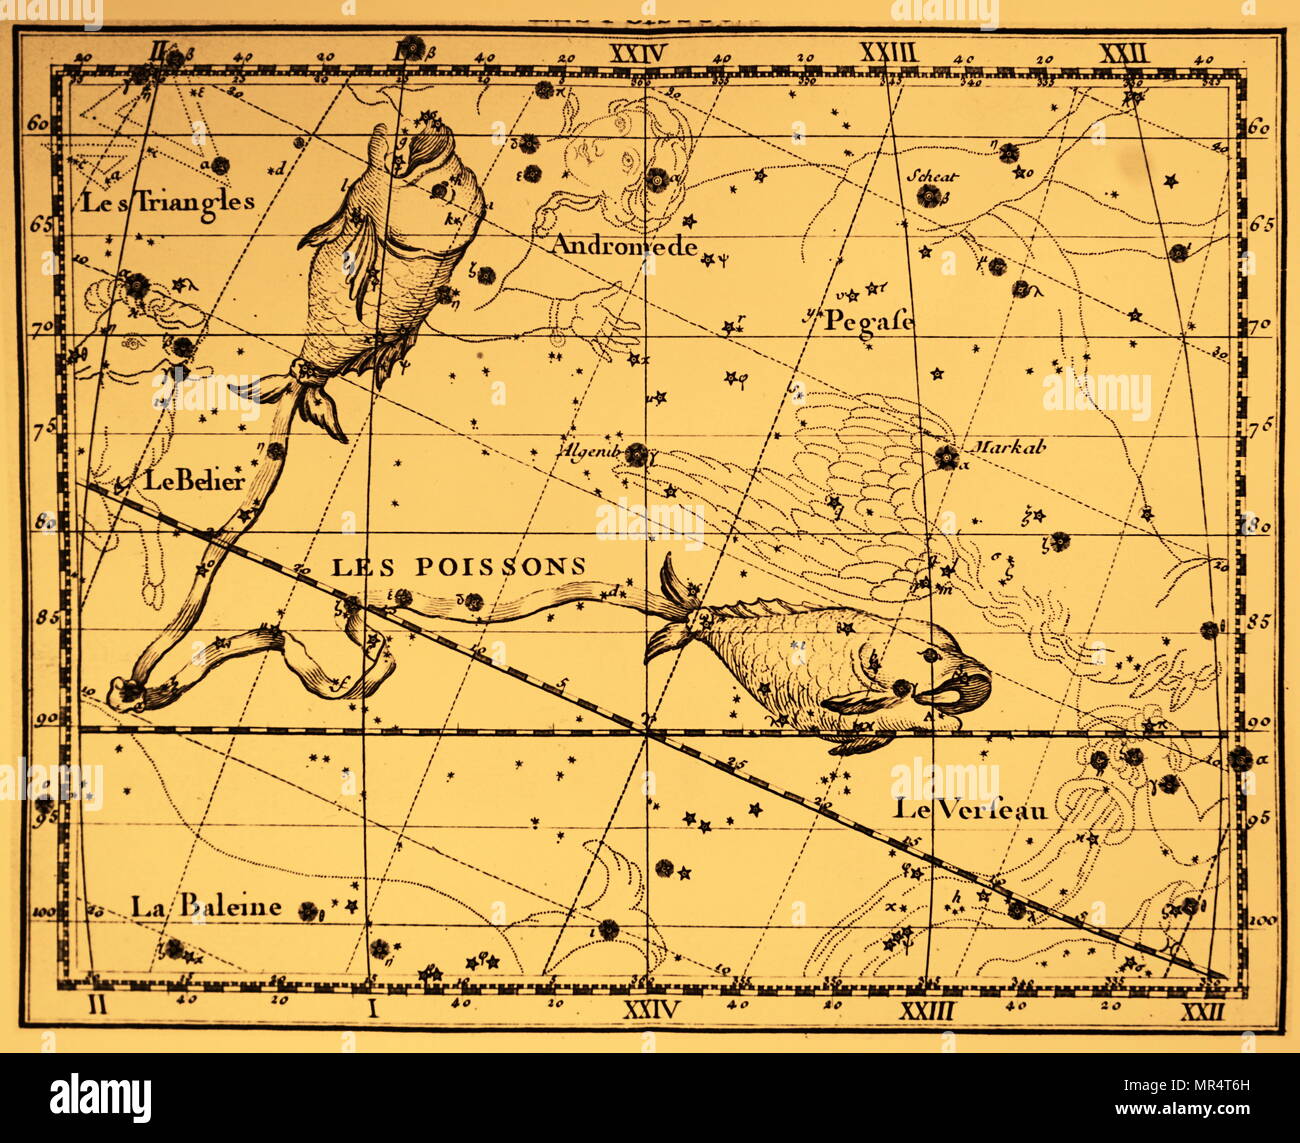 engraving-depicting-the-constellation-pisces-pisces-is-one-of-the-constellations-of-the-zodiac-dated-18th-century-MR4T6H.jpg